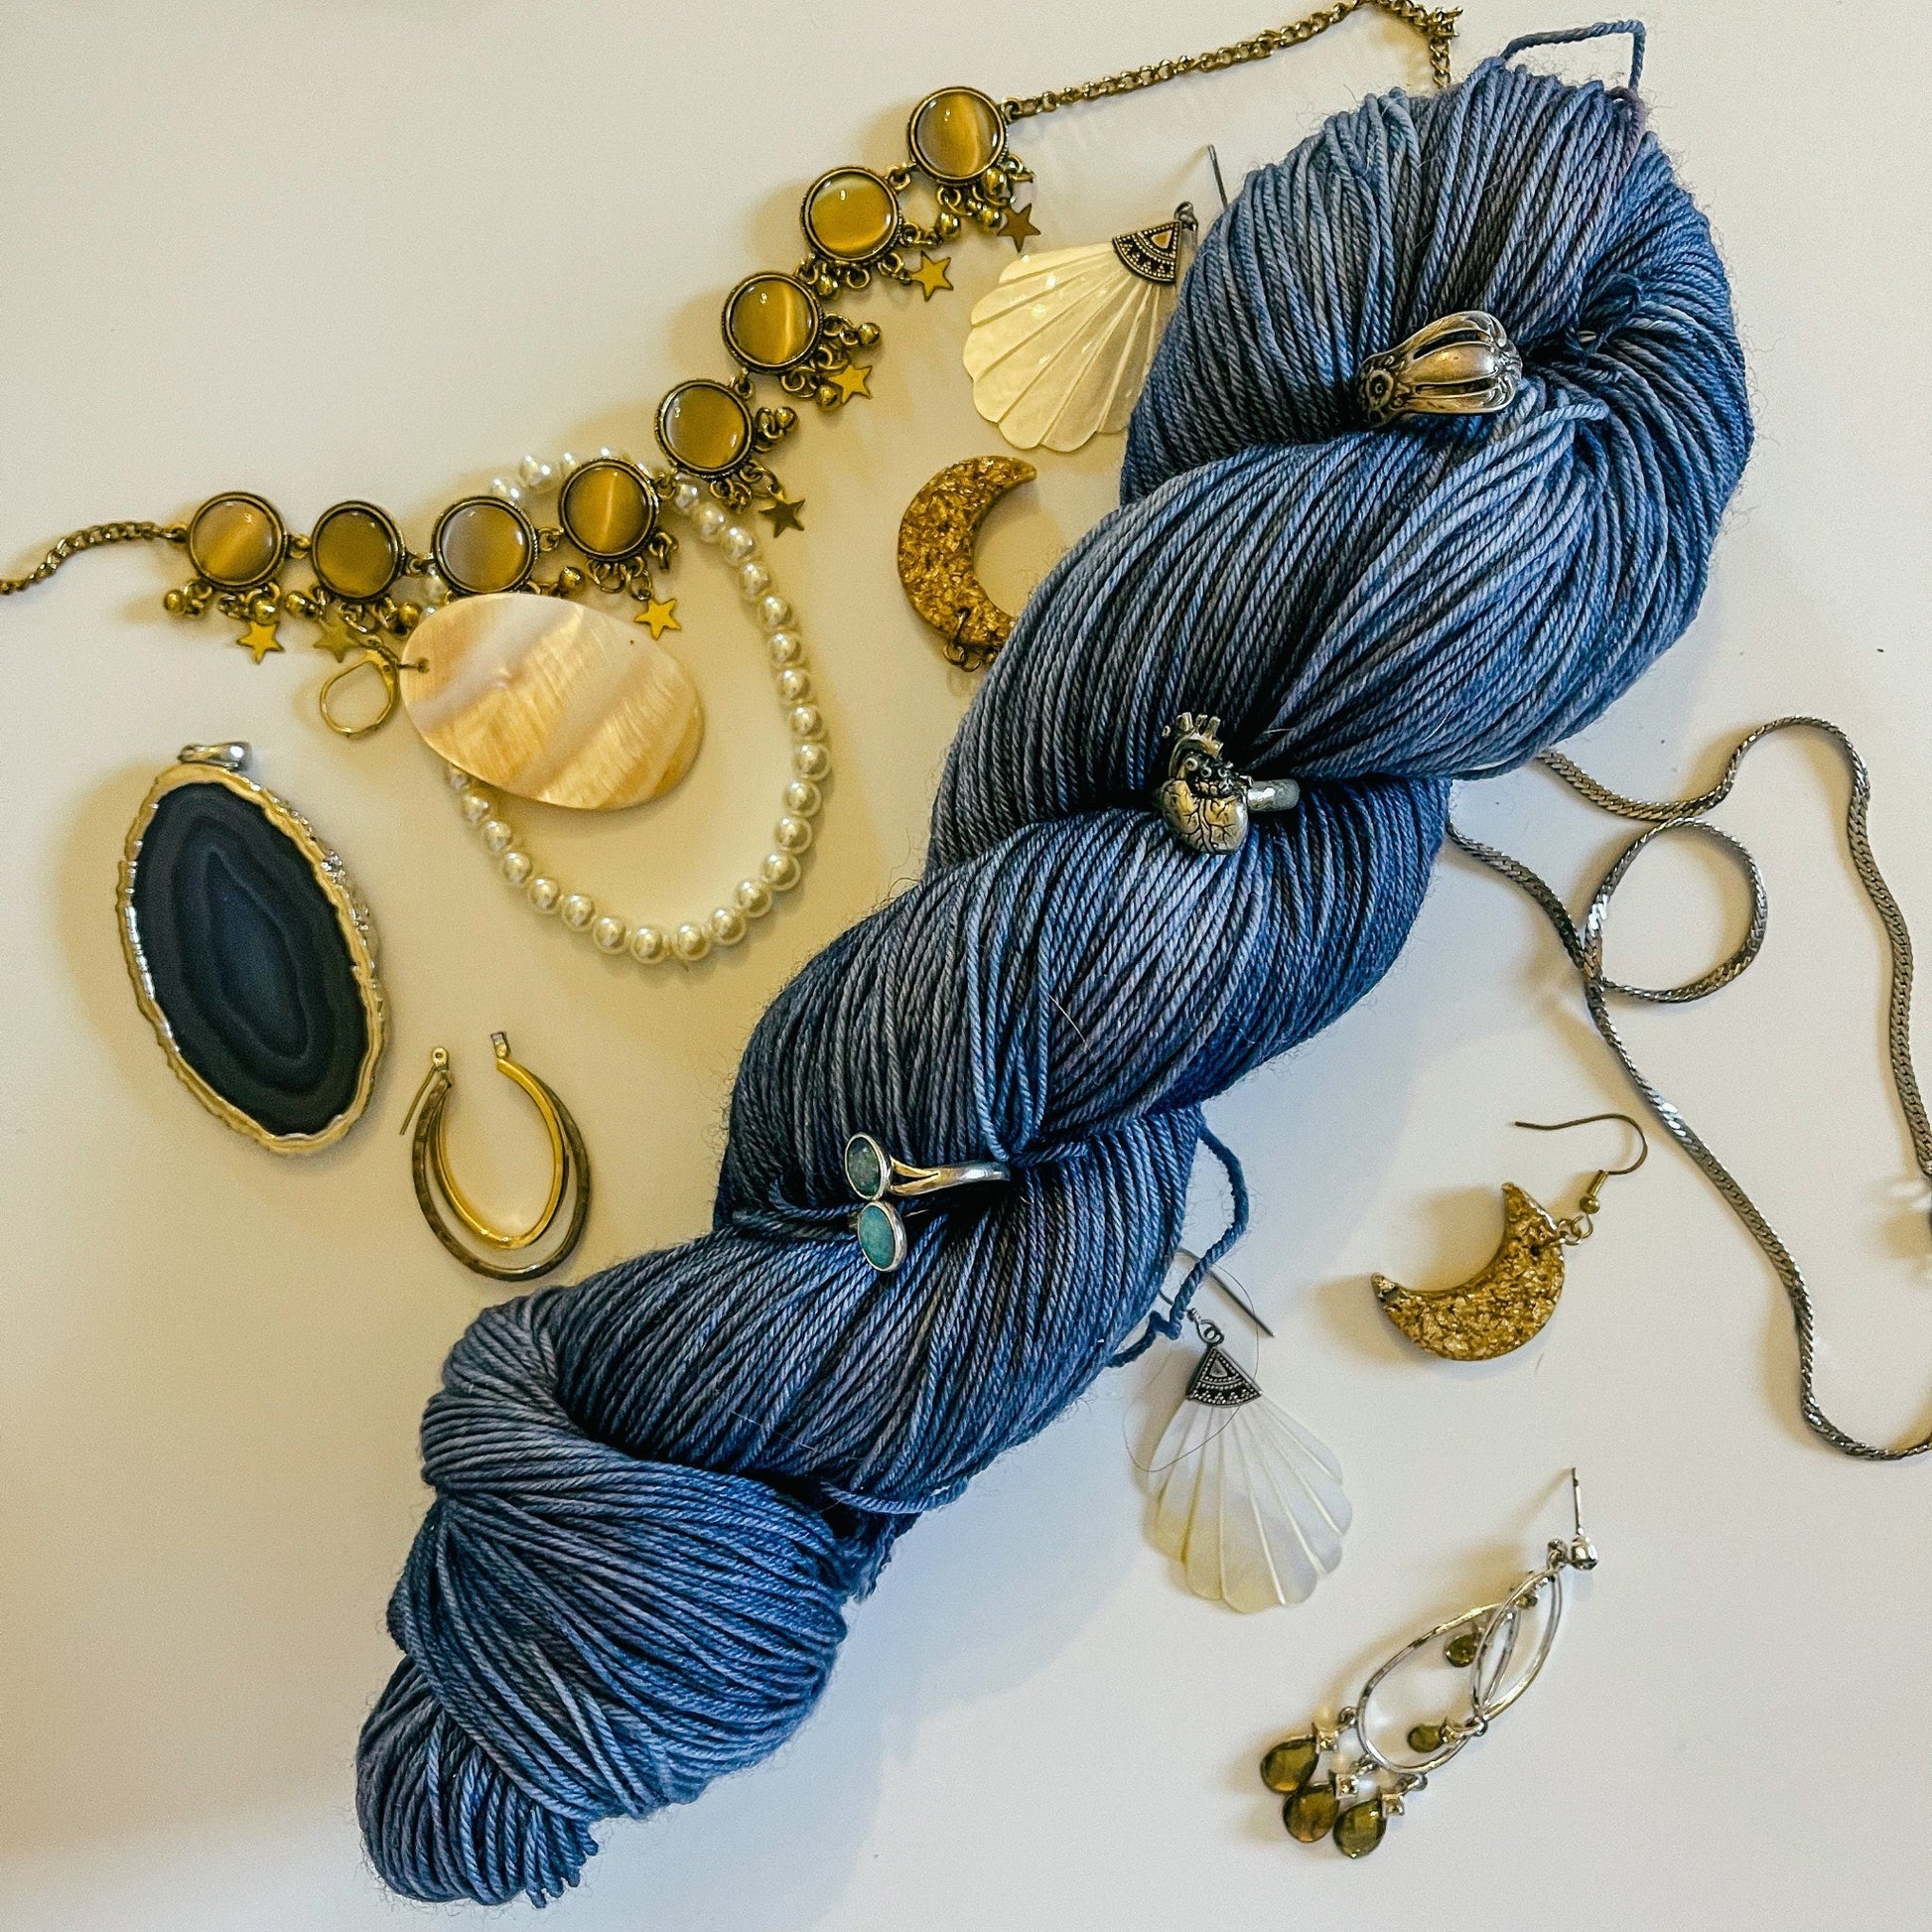 A skein of Hey Ewe Guys hand-dyed yarn surrounded by jewelry.